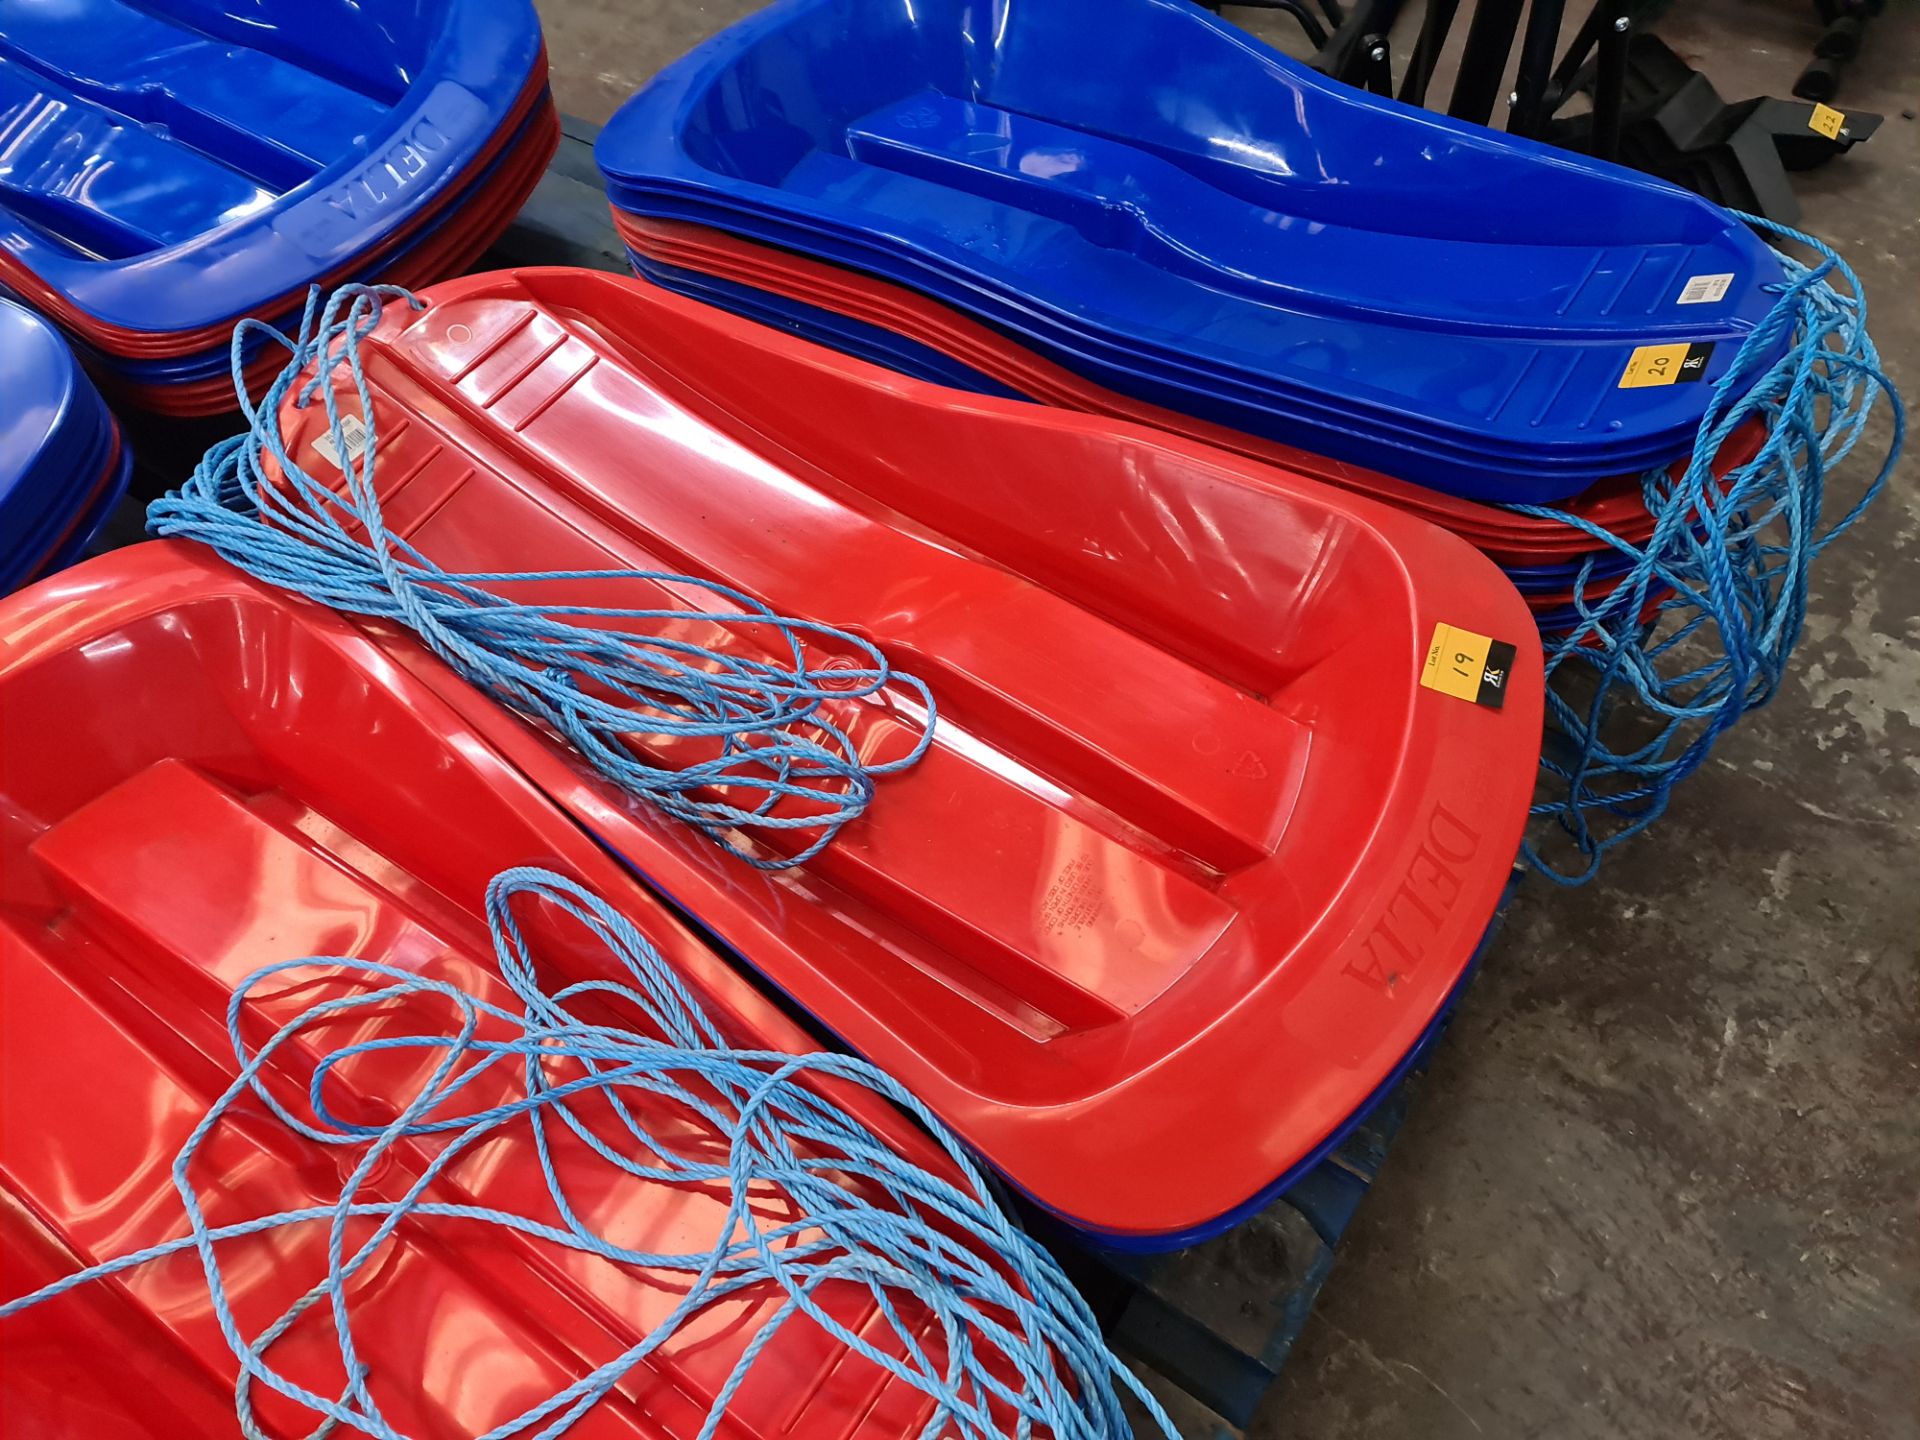 10 off Delta sledges - mixed lot of blue and red